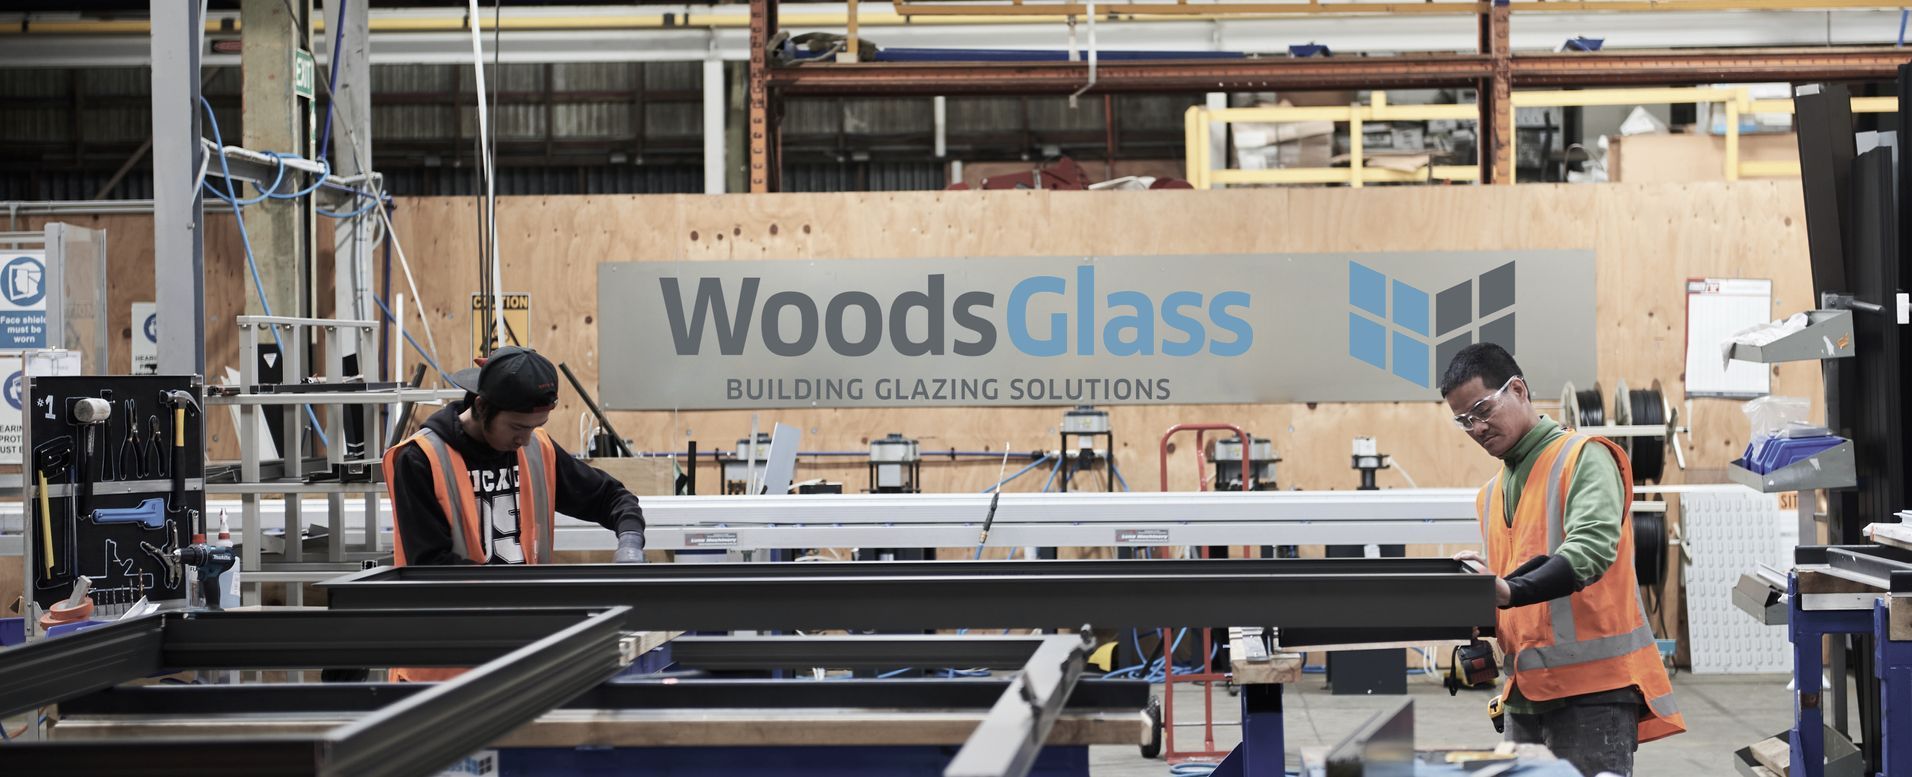 Woods Glass Banner image